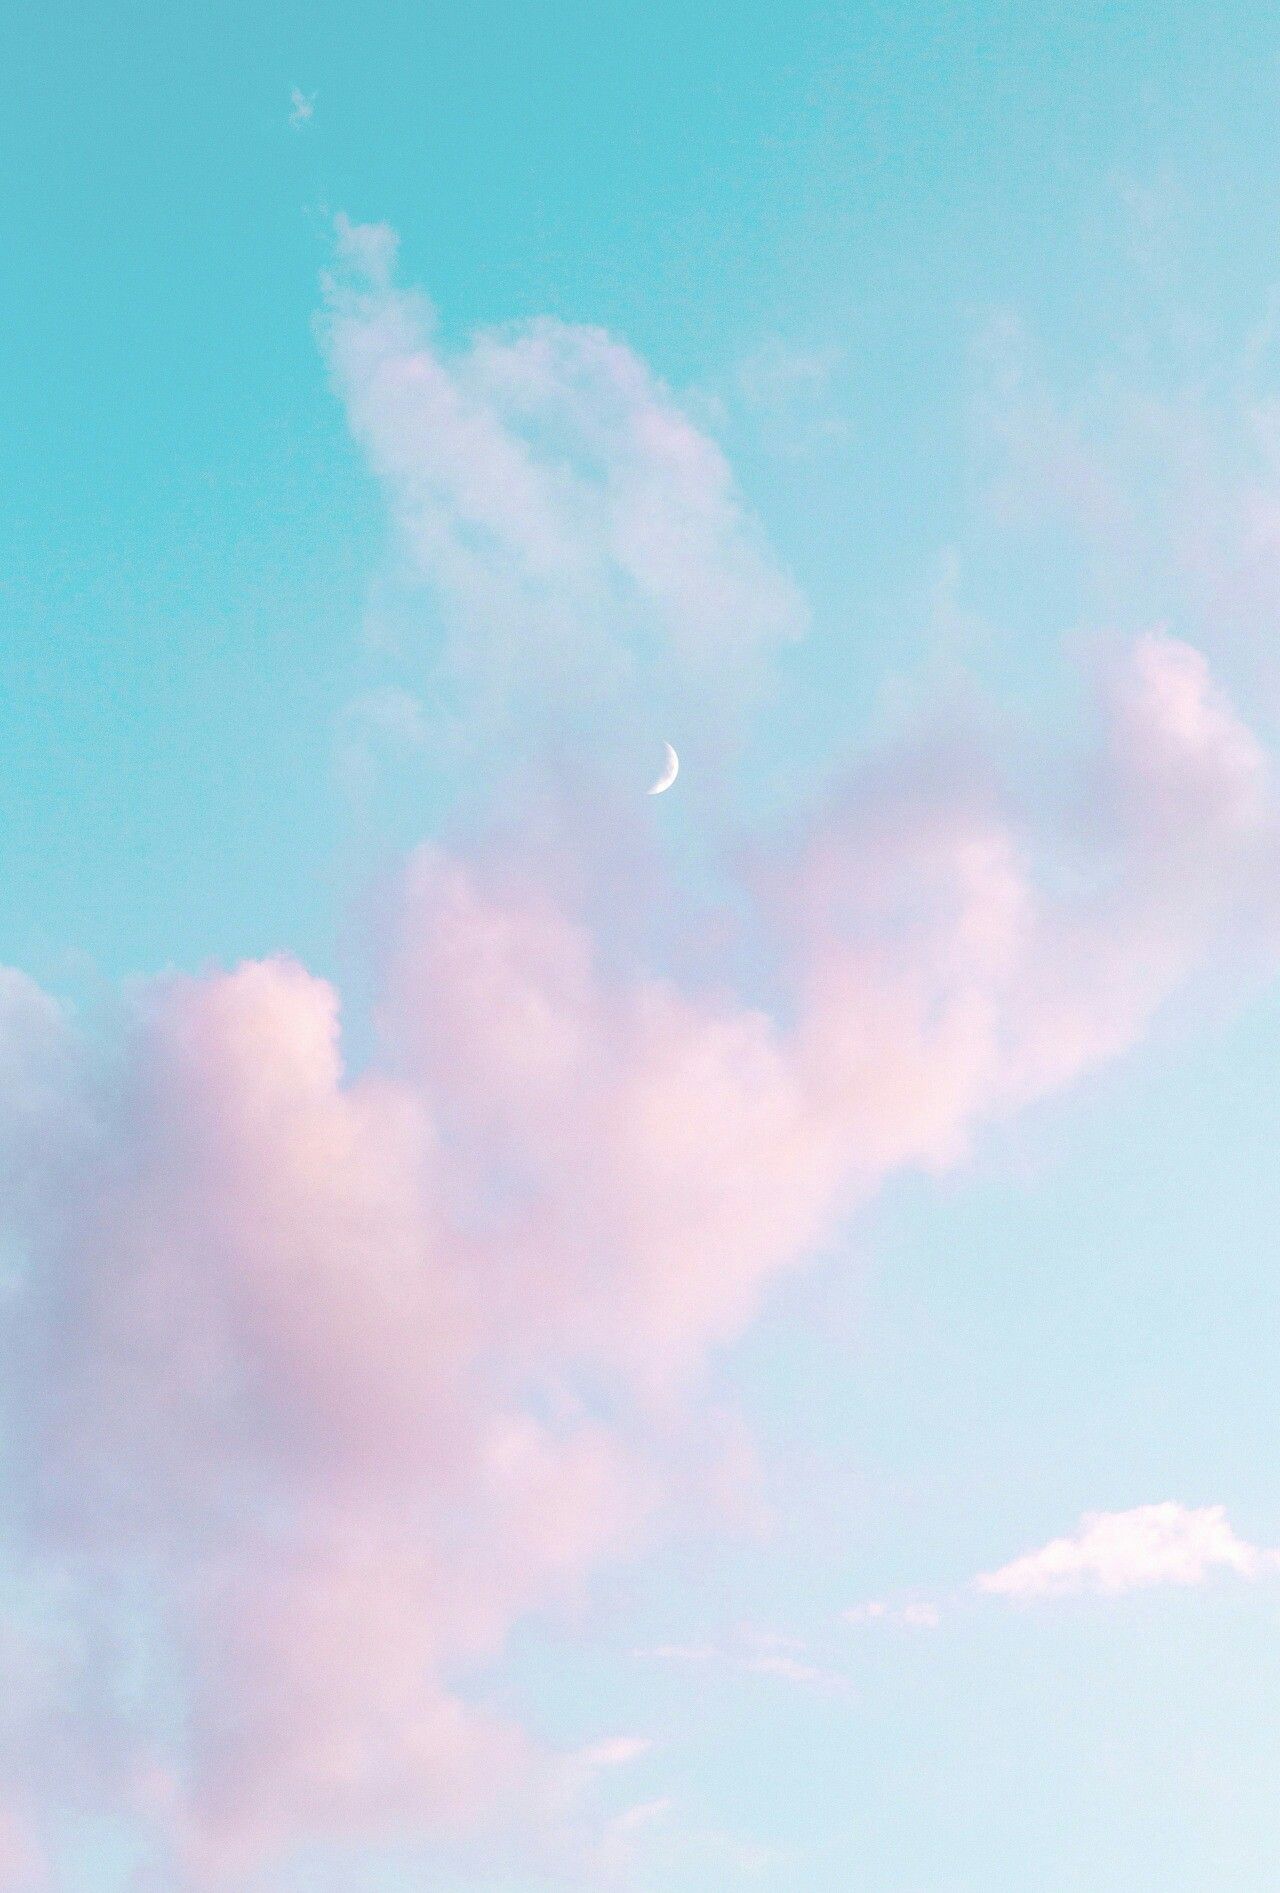 Aesthetic phone wallpaper of a crescent moon in a blue sky with pink clouds - Pastel, cloud, light blue